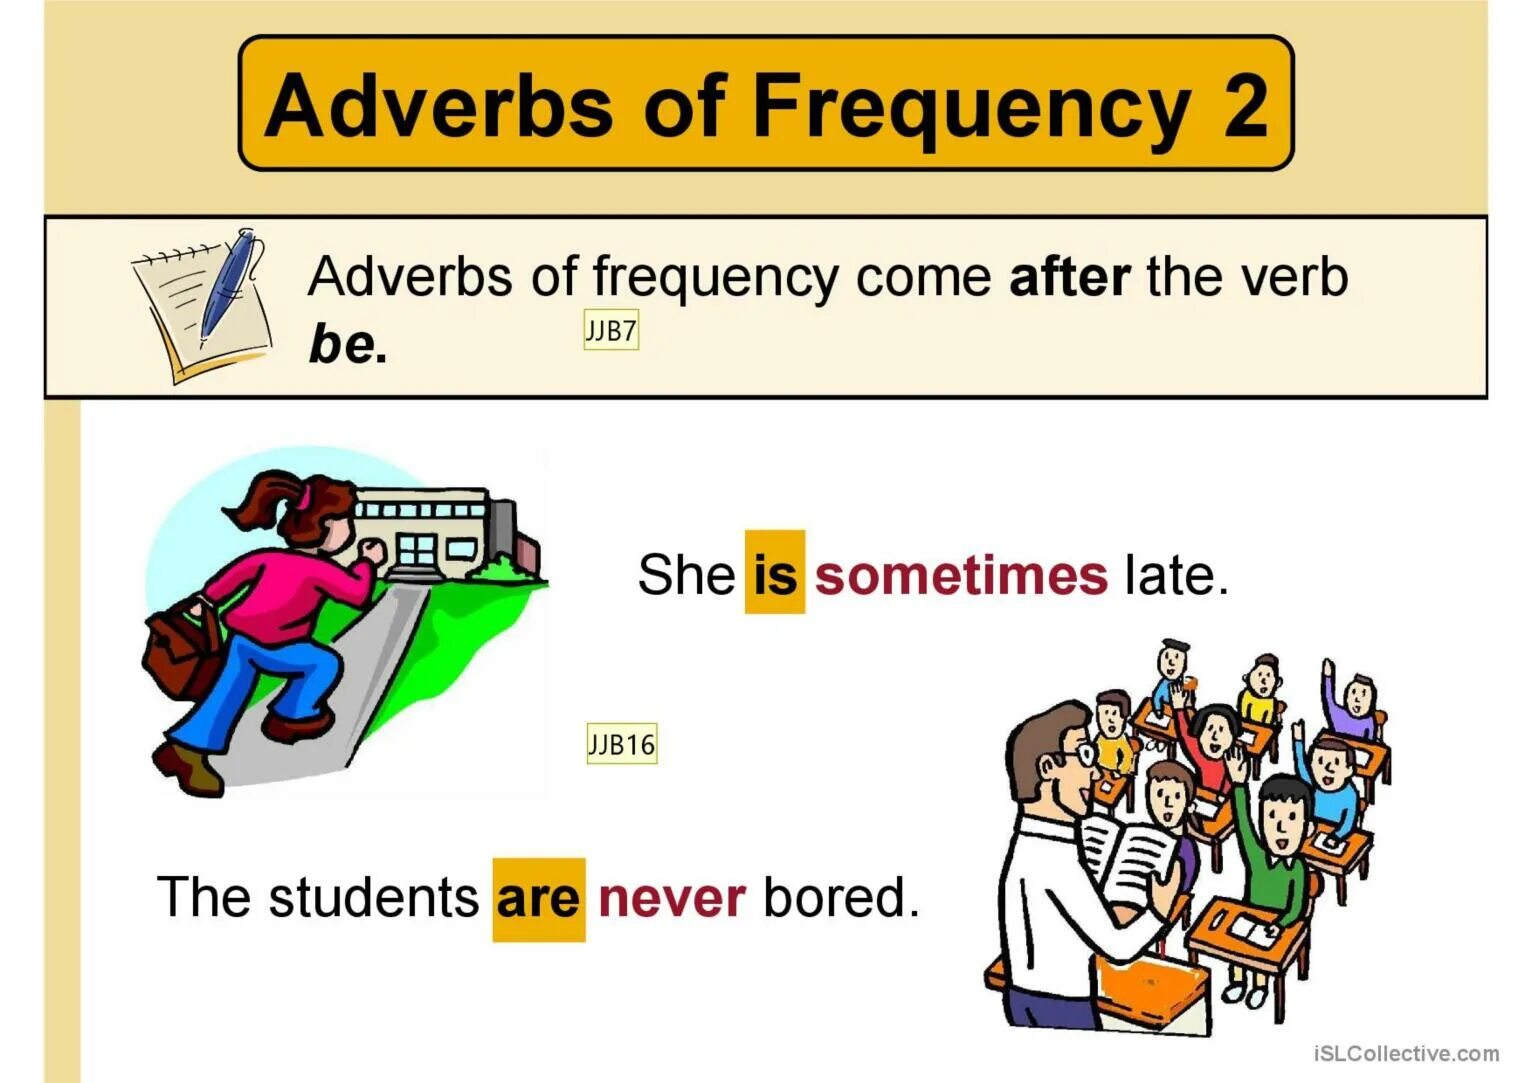 Adverbs of Frequency. Adverbials of Frequency. Adverbs of Frequency схема. Adverbs of Frequency для детей. Adverbs of frequency in the sentence